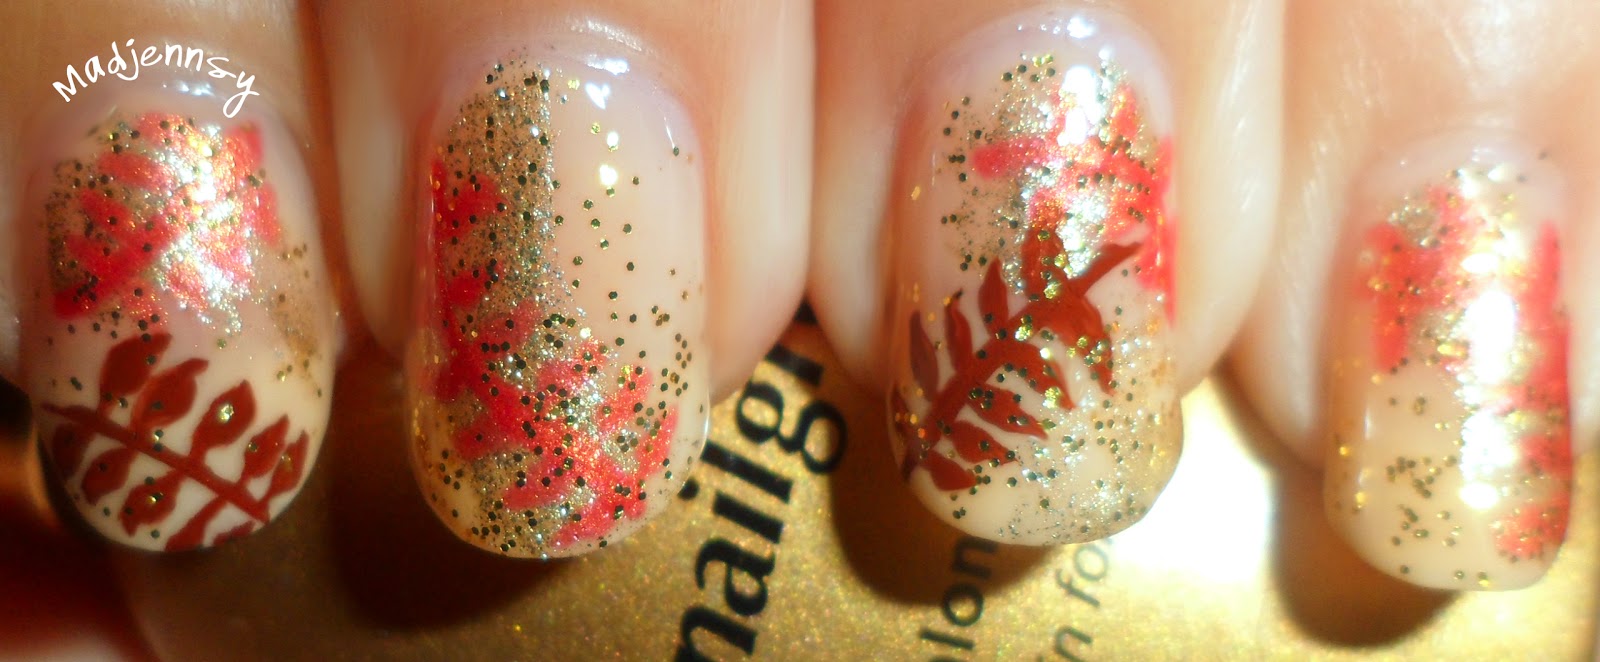 4. Fall Leaves Nail Art Inspiration - wide 5